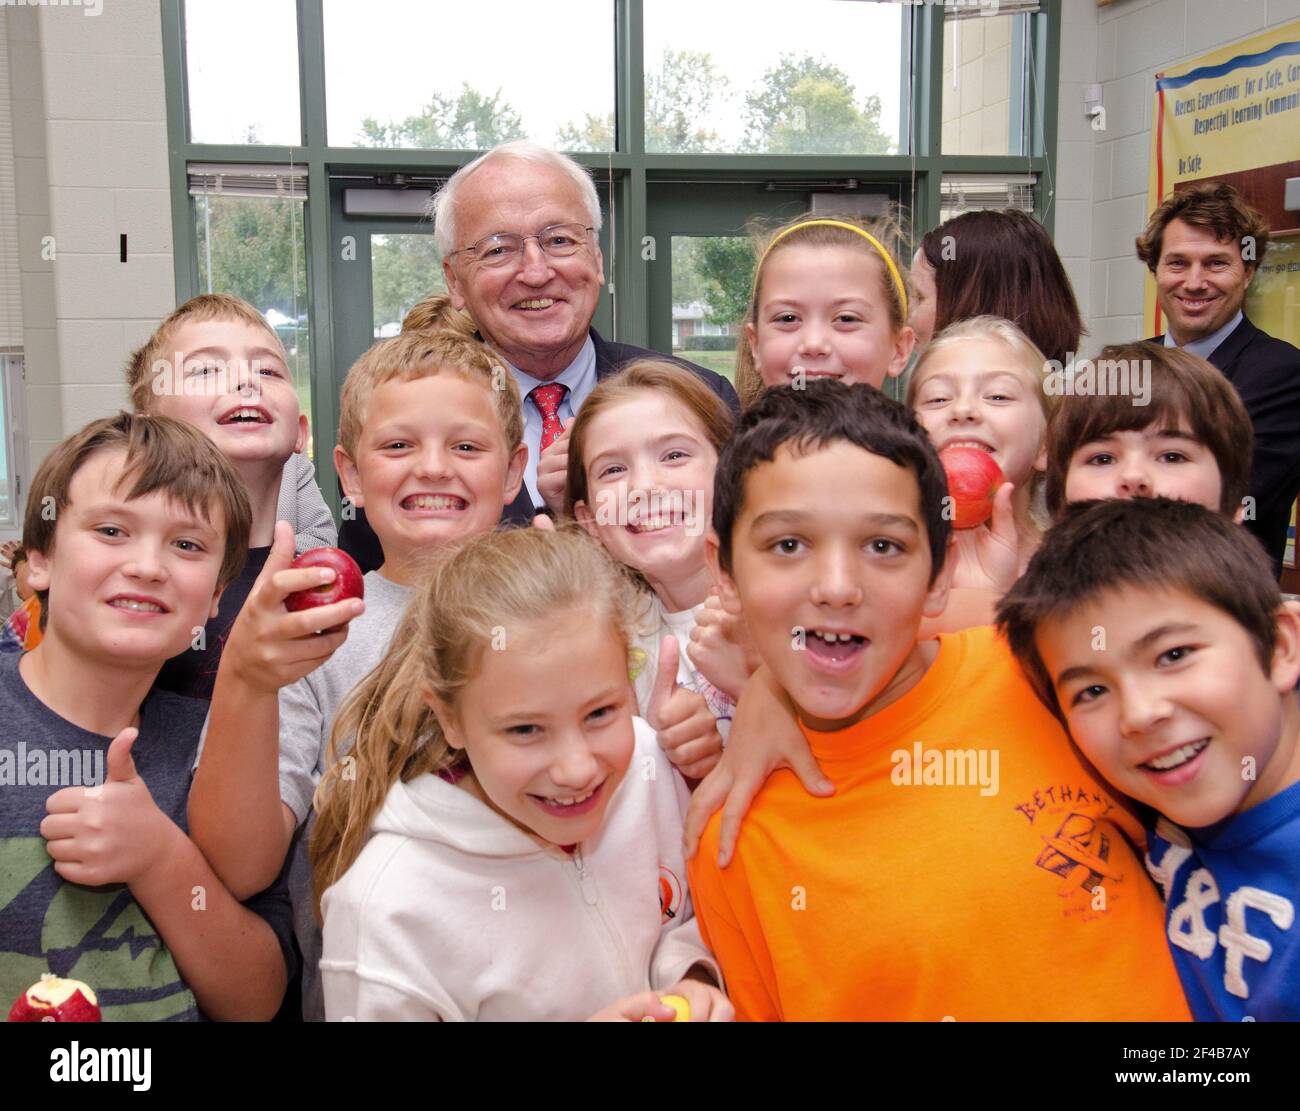 Several students stopped to have a photo taken with Under Secretary for Food, Nutrition and Consumer Services Kevin Concannon (backrow c.) during his visit to Nottingham Elementary School in Arlington, VA, on Wednesday, October 12, 2011. The apples, they are eating, are from Big Rigg farm, and were very popular with the students. Stock Photo